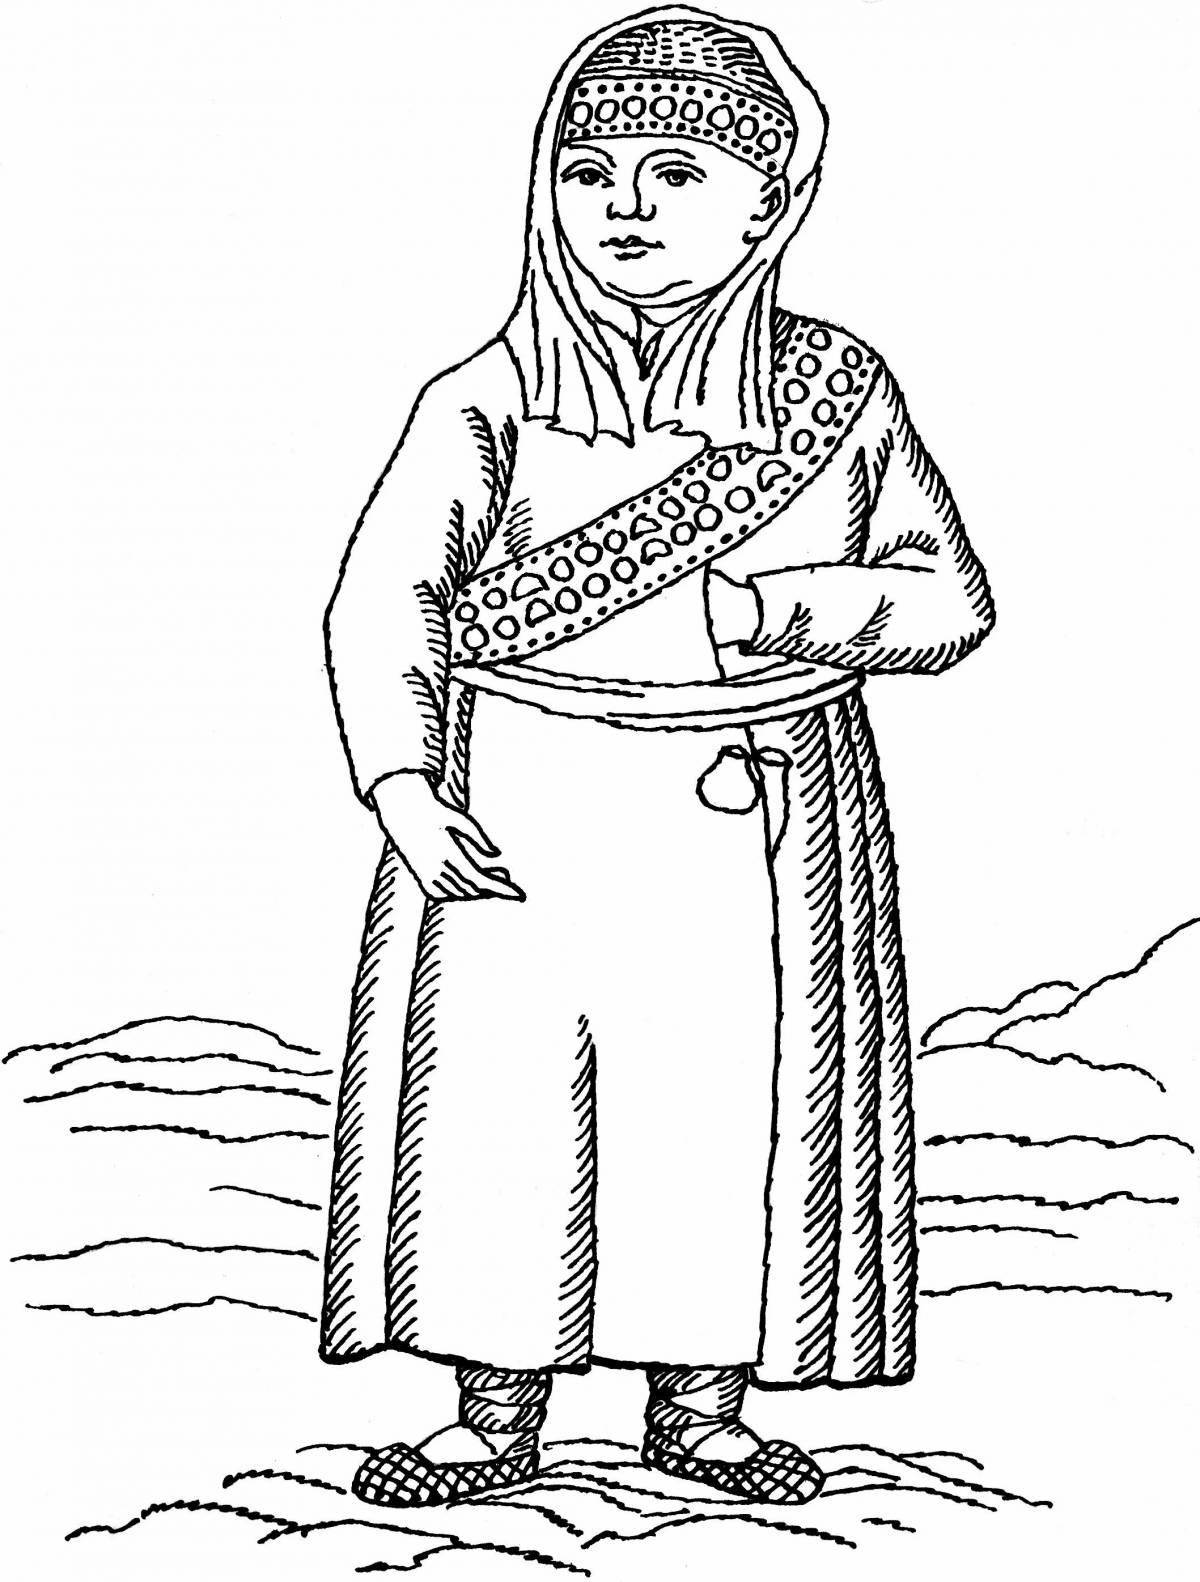 Coloring page inviting Udmurt national costume